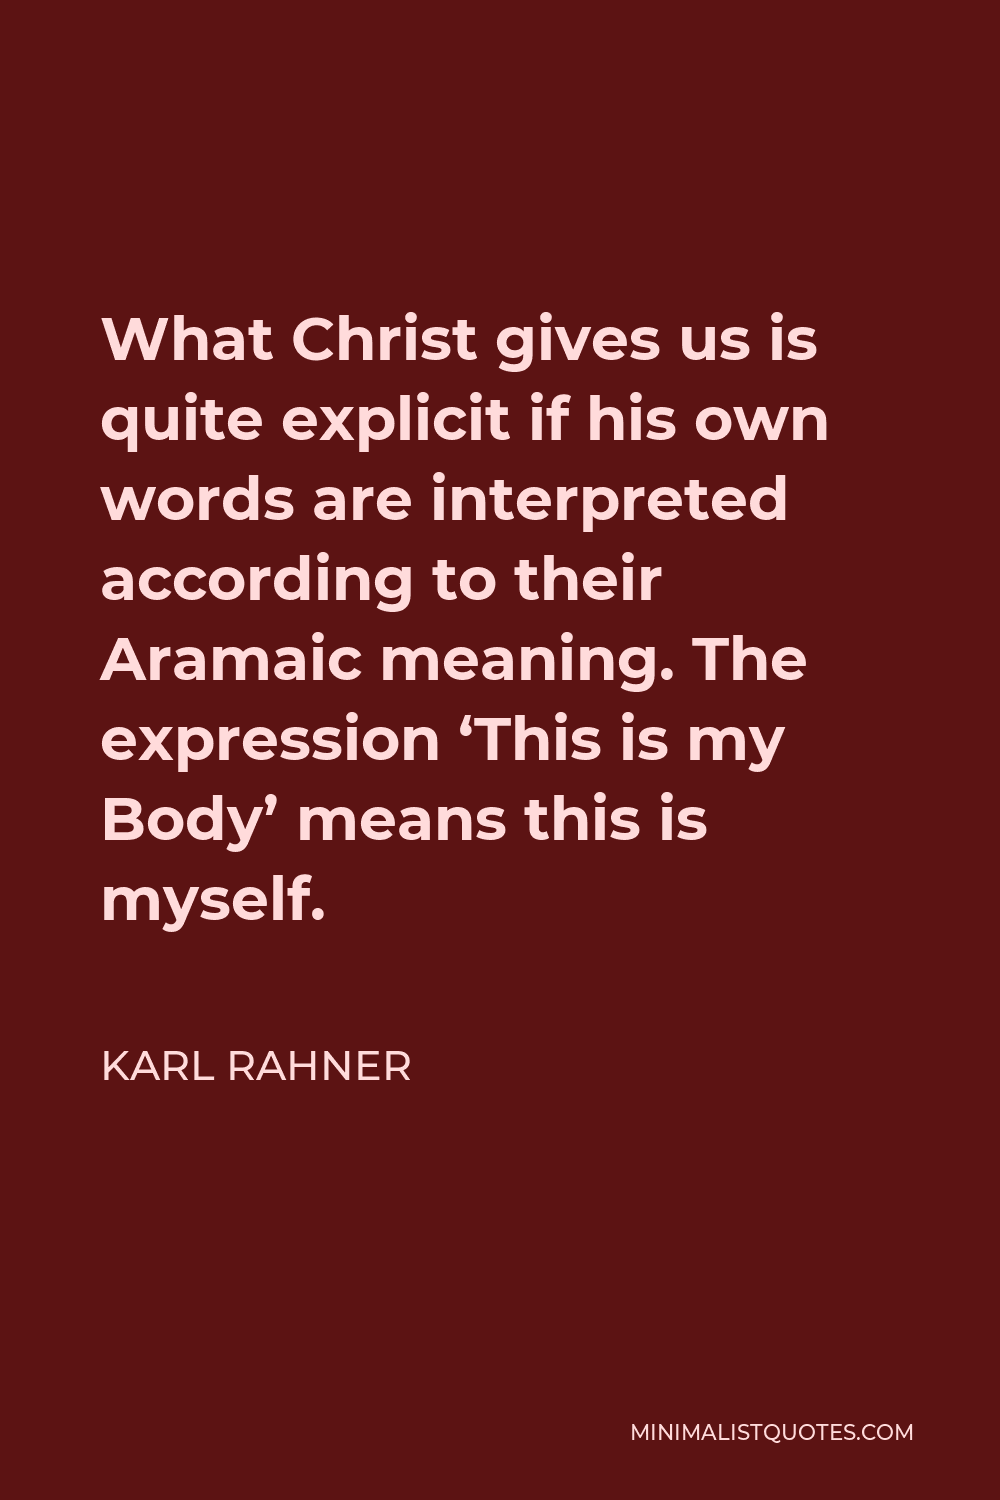 Karl Rahner Quote - What Christ gives us is quite explicit if his own words are interpreted according to their Aramaic meaning. The expression ‘This is my Body’ means this is myself.